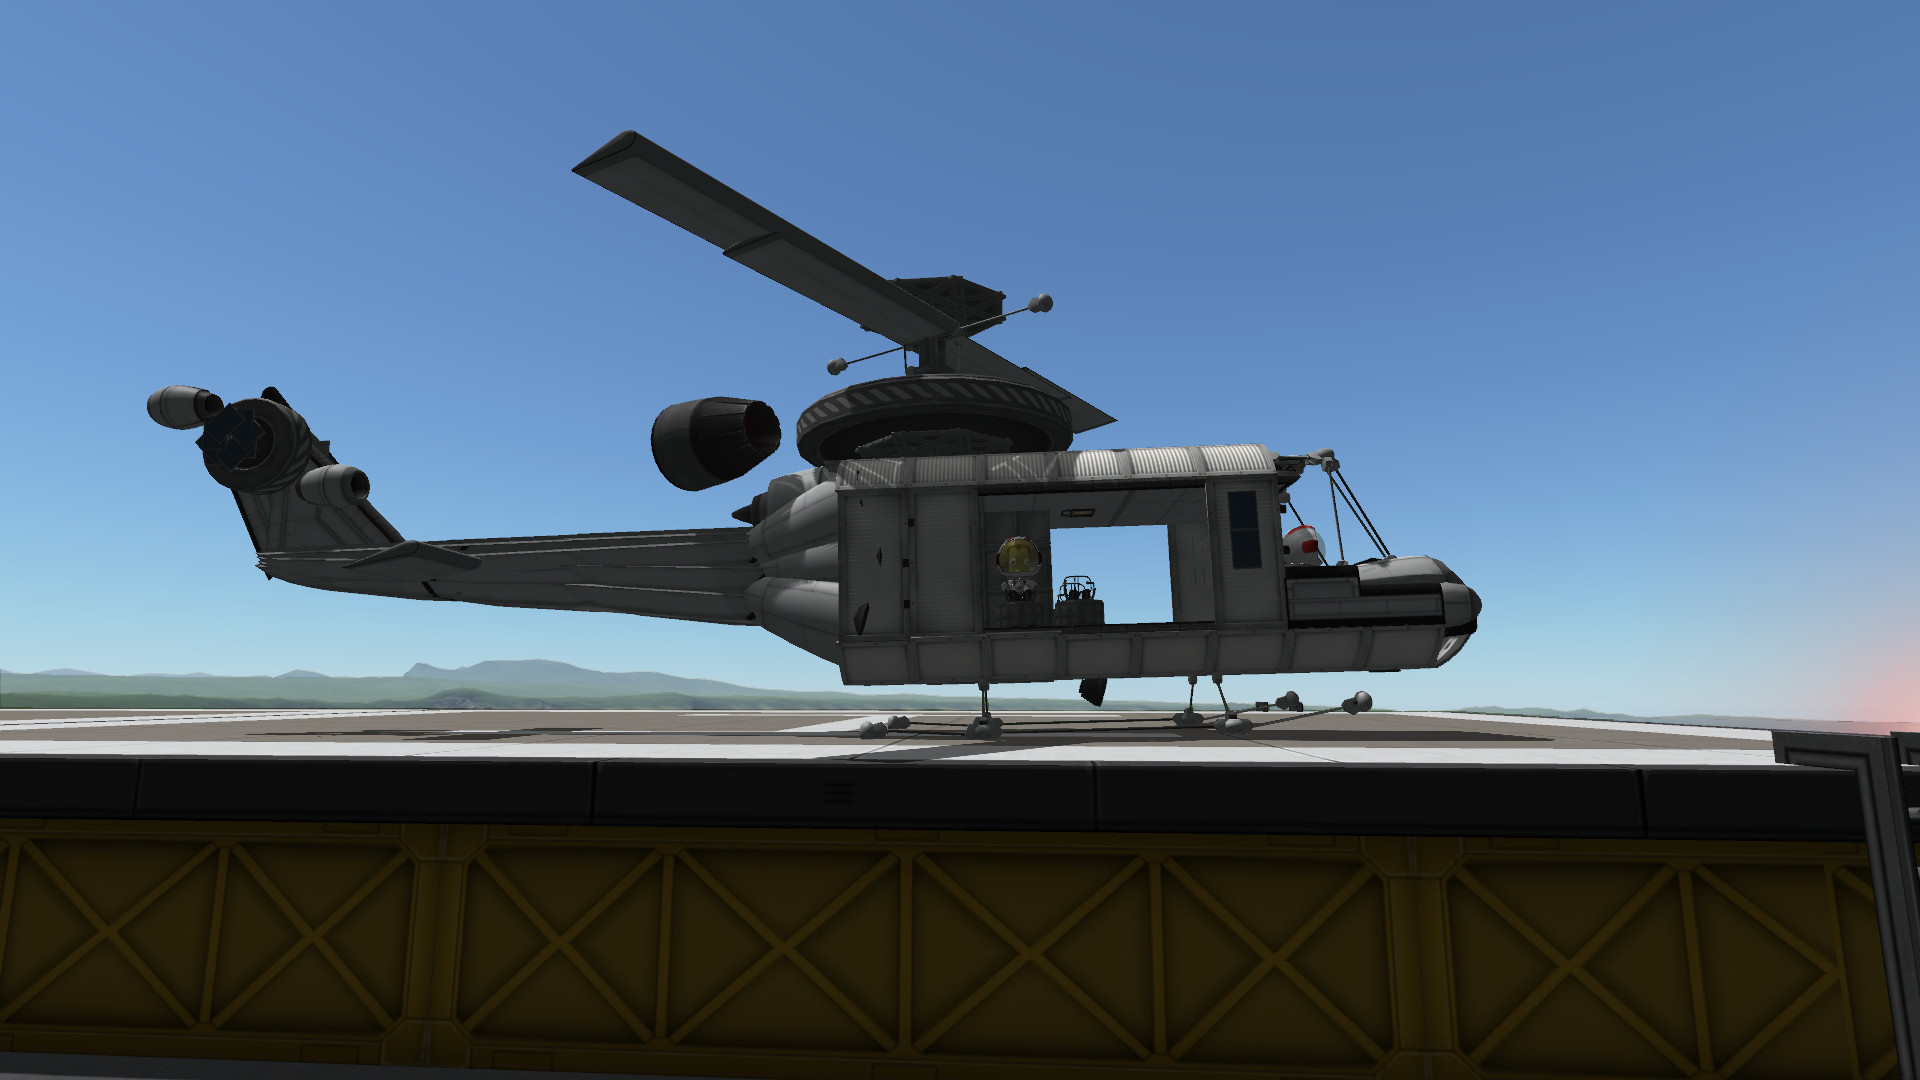 1920x1080 The Huey is the iconic helicopter from the Vietnam War. From the day I  started making KSP helicopters, I knew I'd try to make one some day, and  here it is !